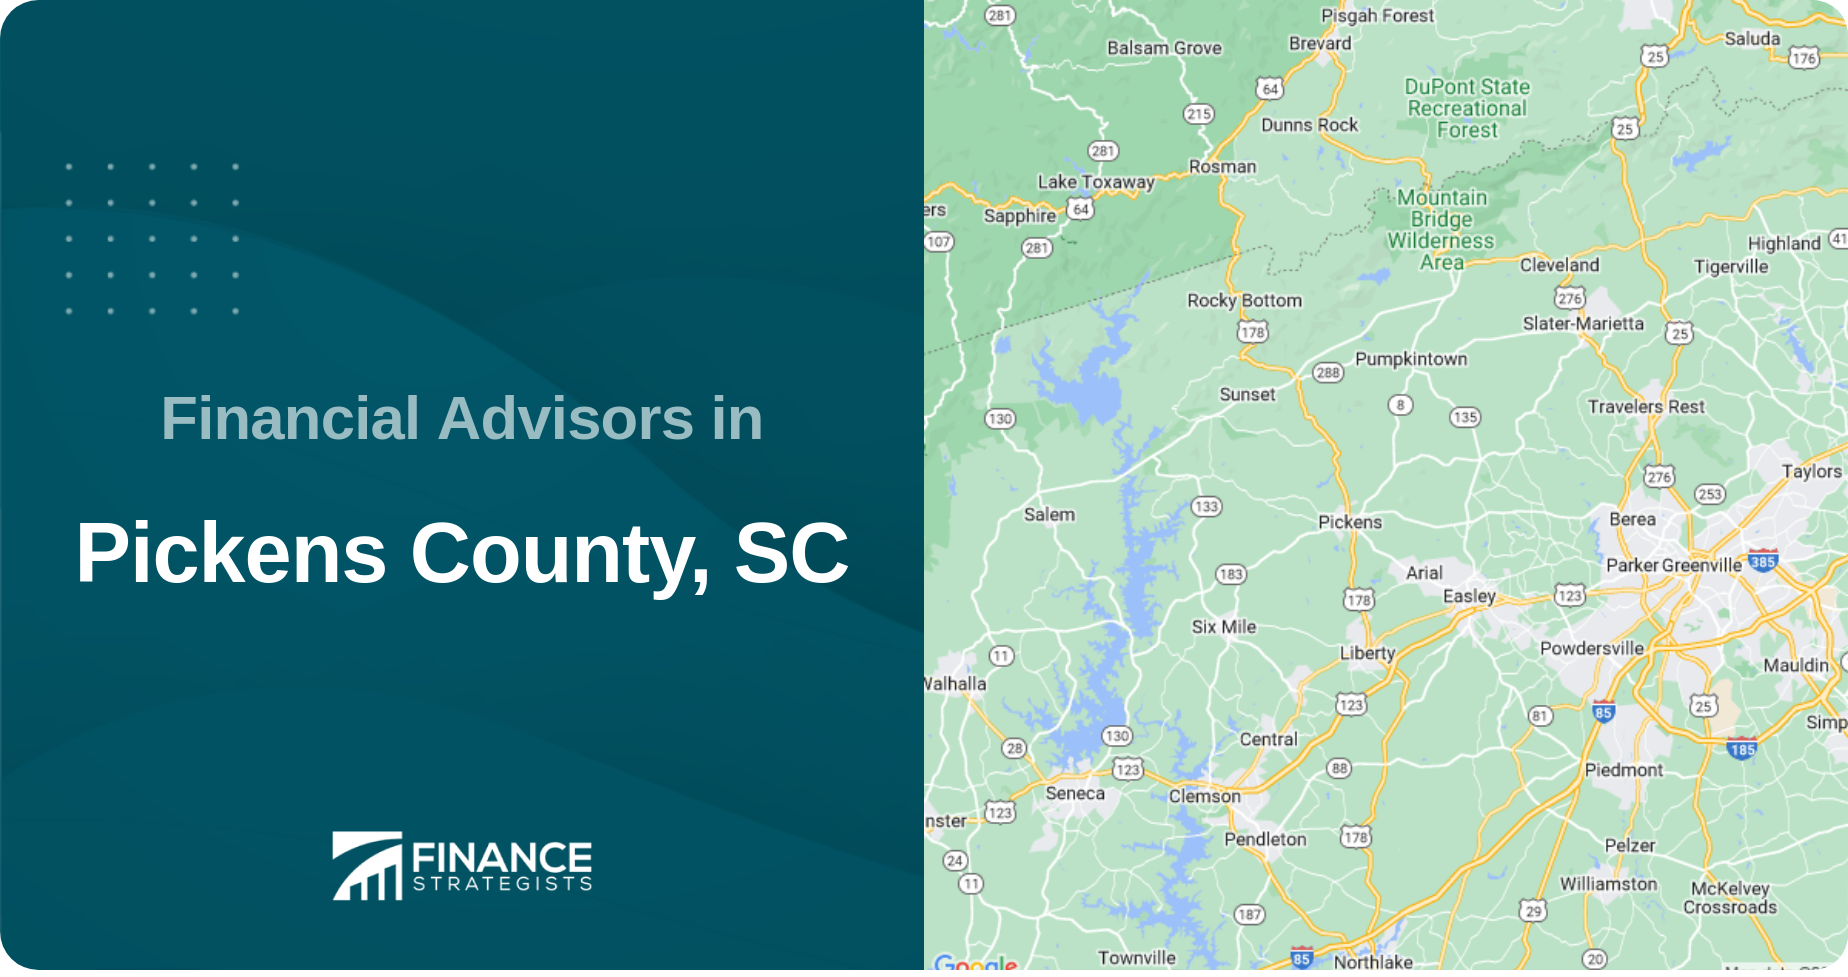 Financial Advisors in Pickens County, SC